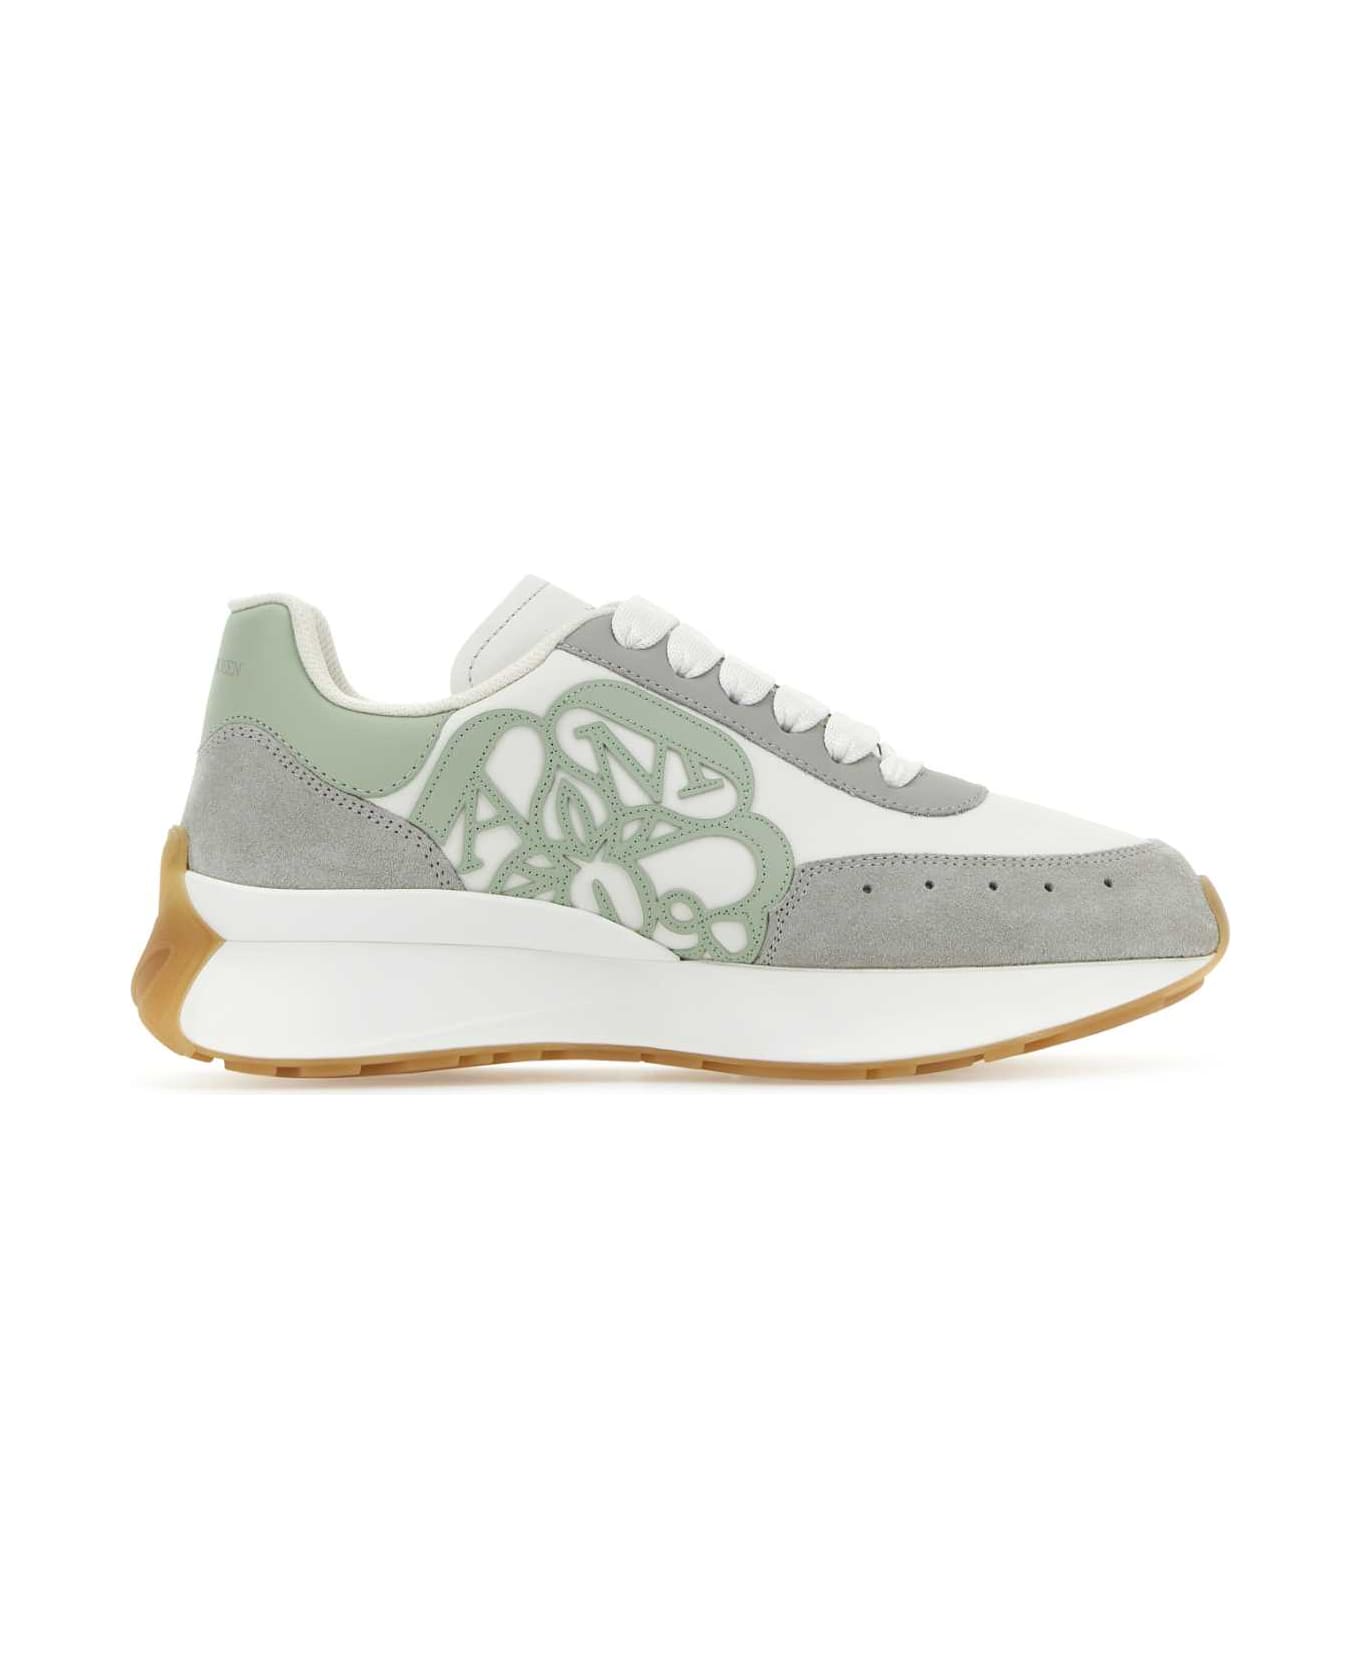 Alexander McQueen Multicolor Leather And Suede Sprint Runner Sneakers - WHCELIMISIAM スニーカー